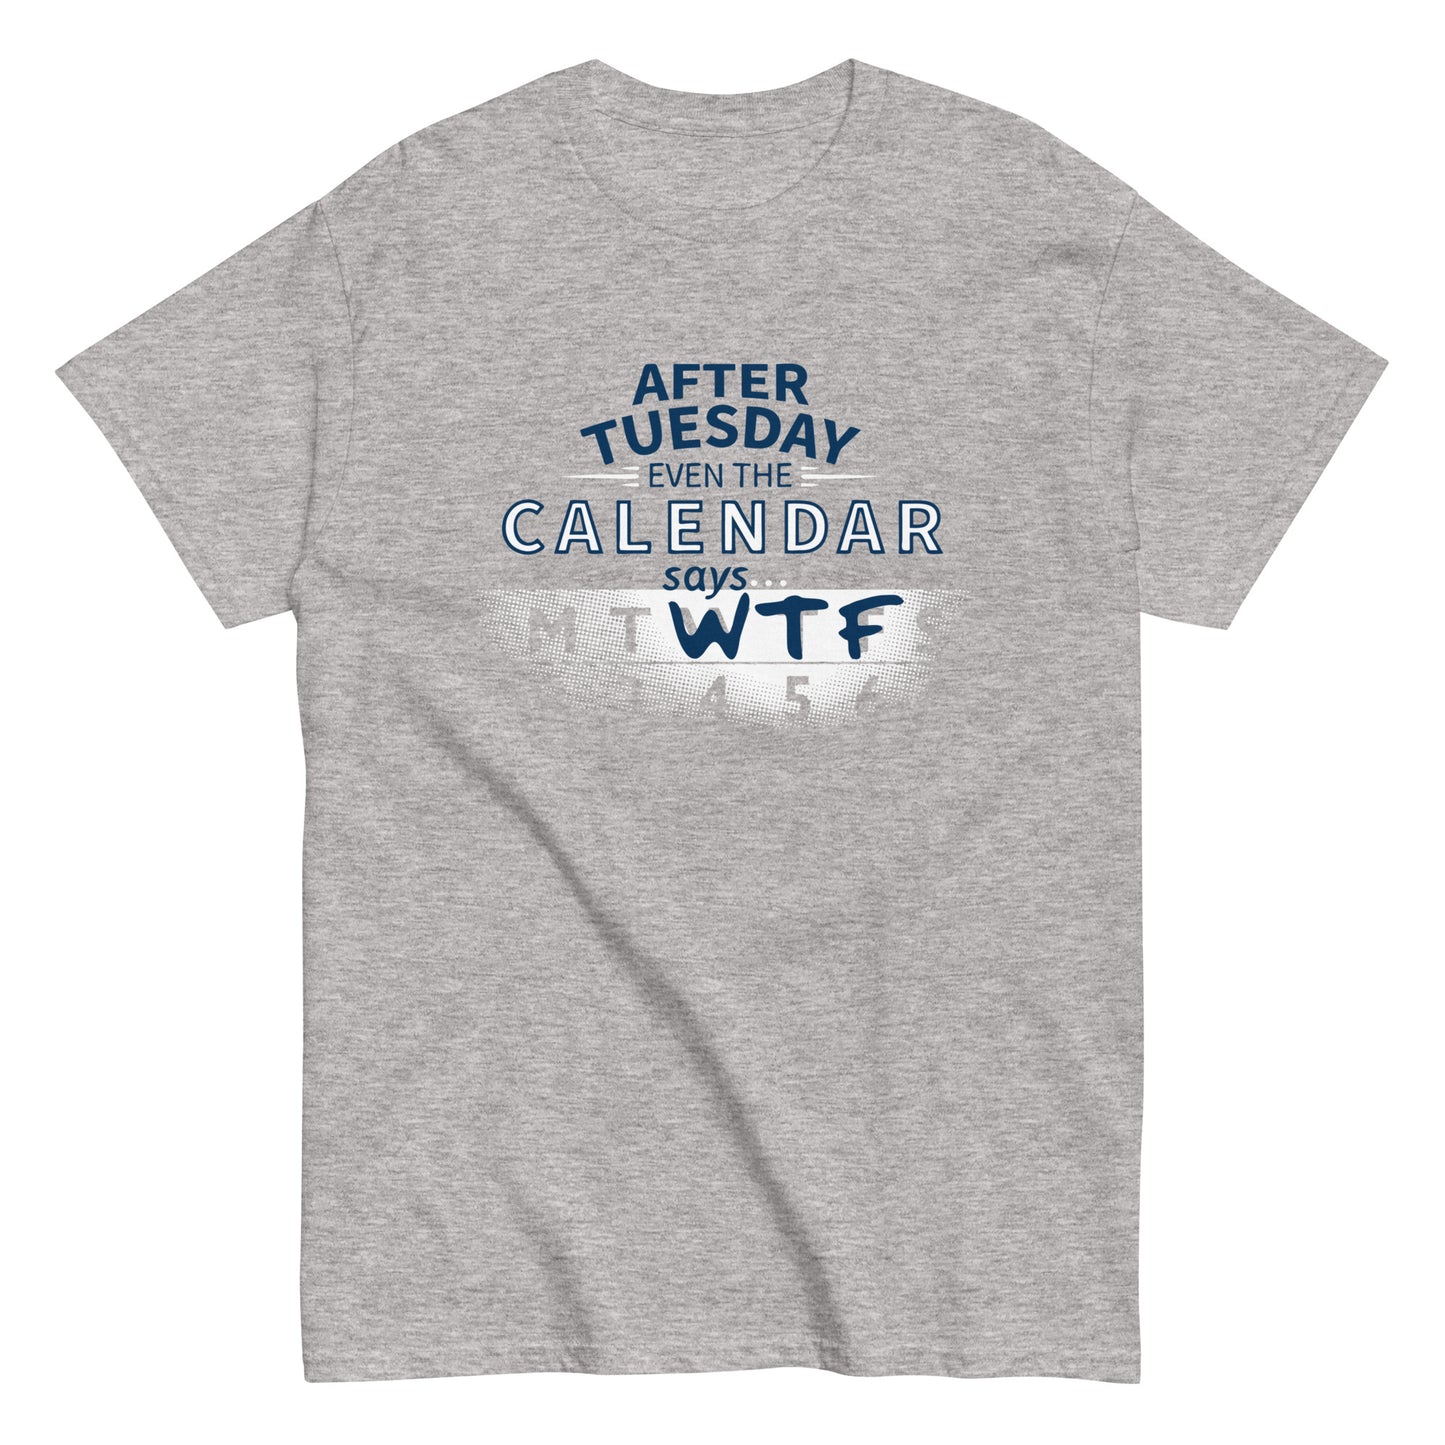 After Tuesday Even The Calendar Says WTF Men's Classic Tee